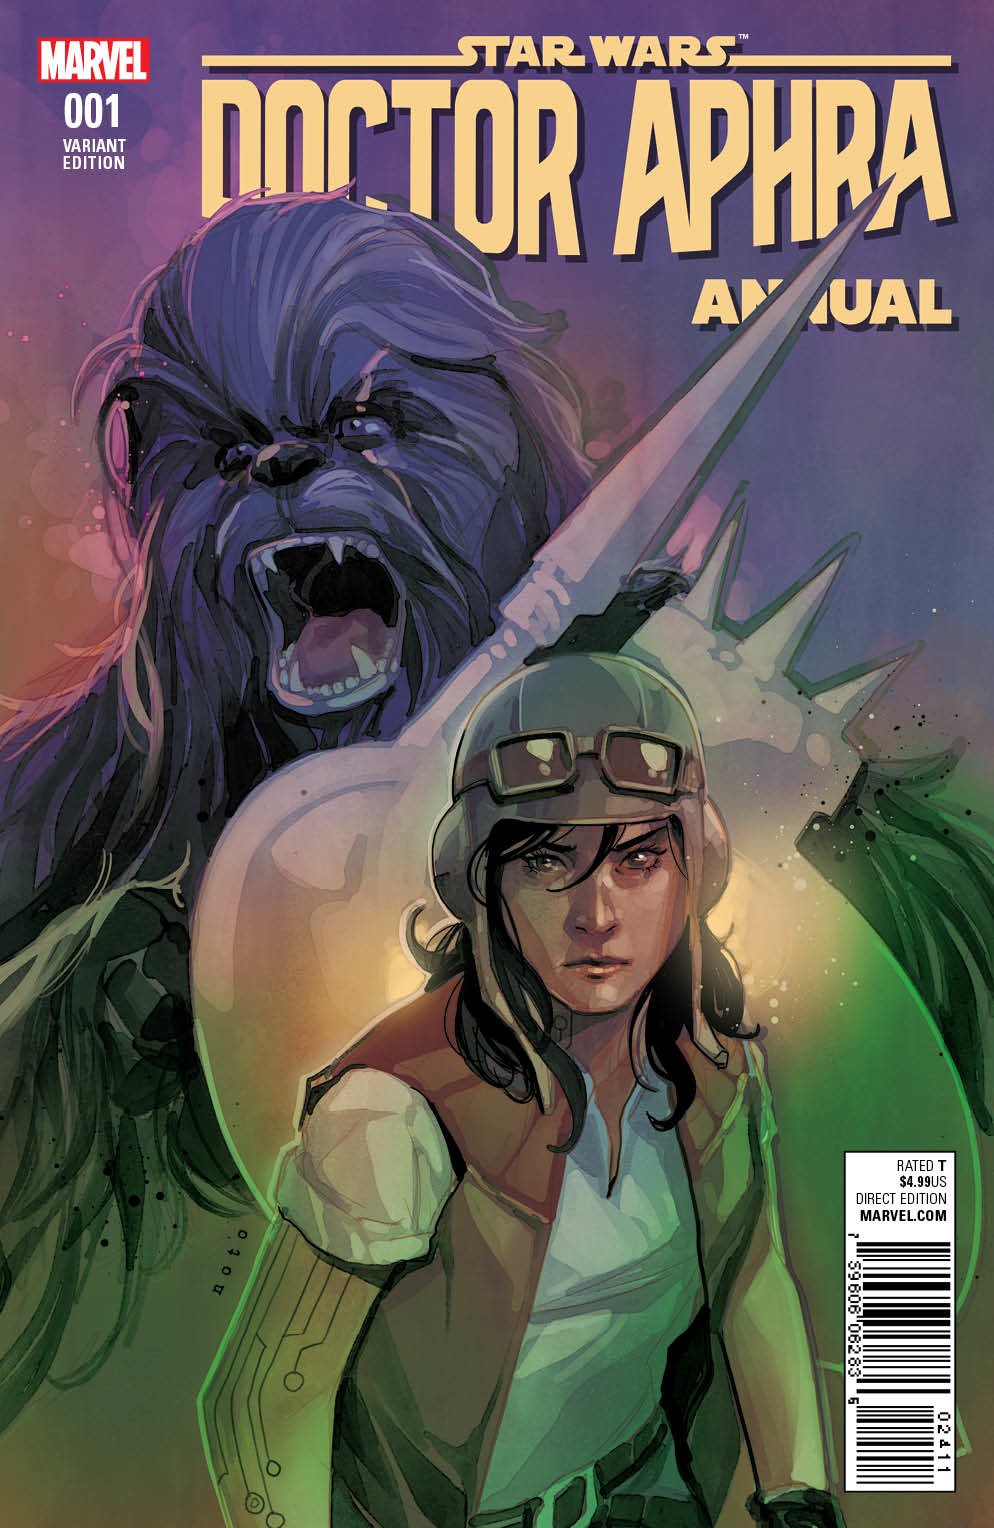 STAR WARS DOCTOR APHRA ANNUAL #1 NOTO VAR COVER